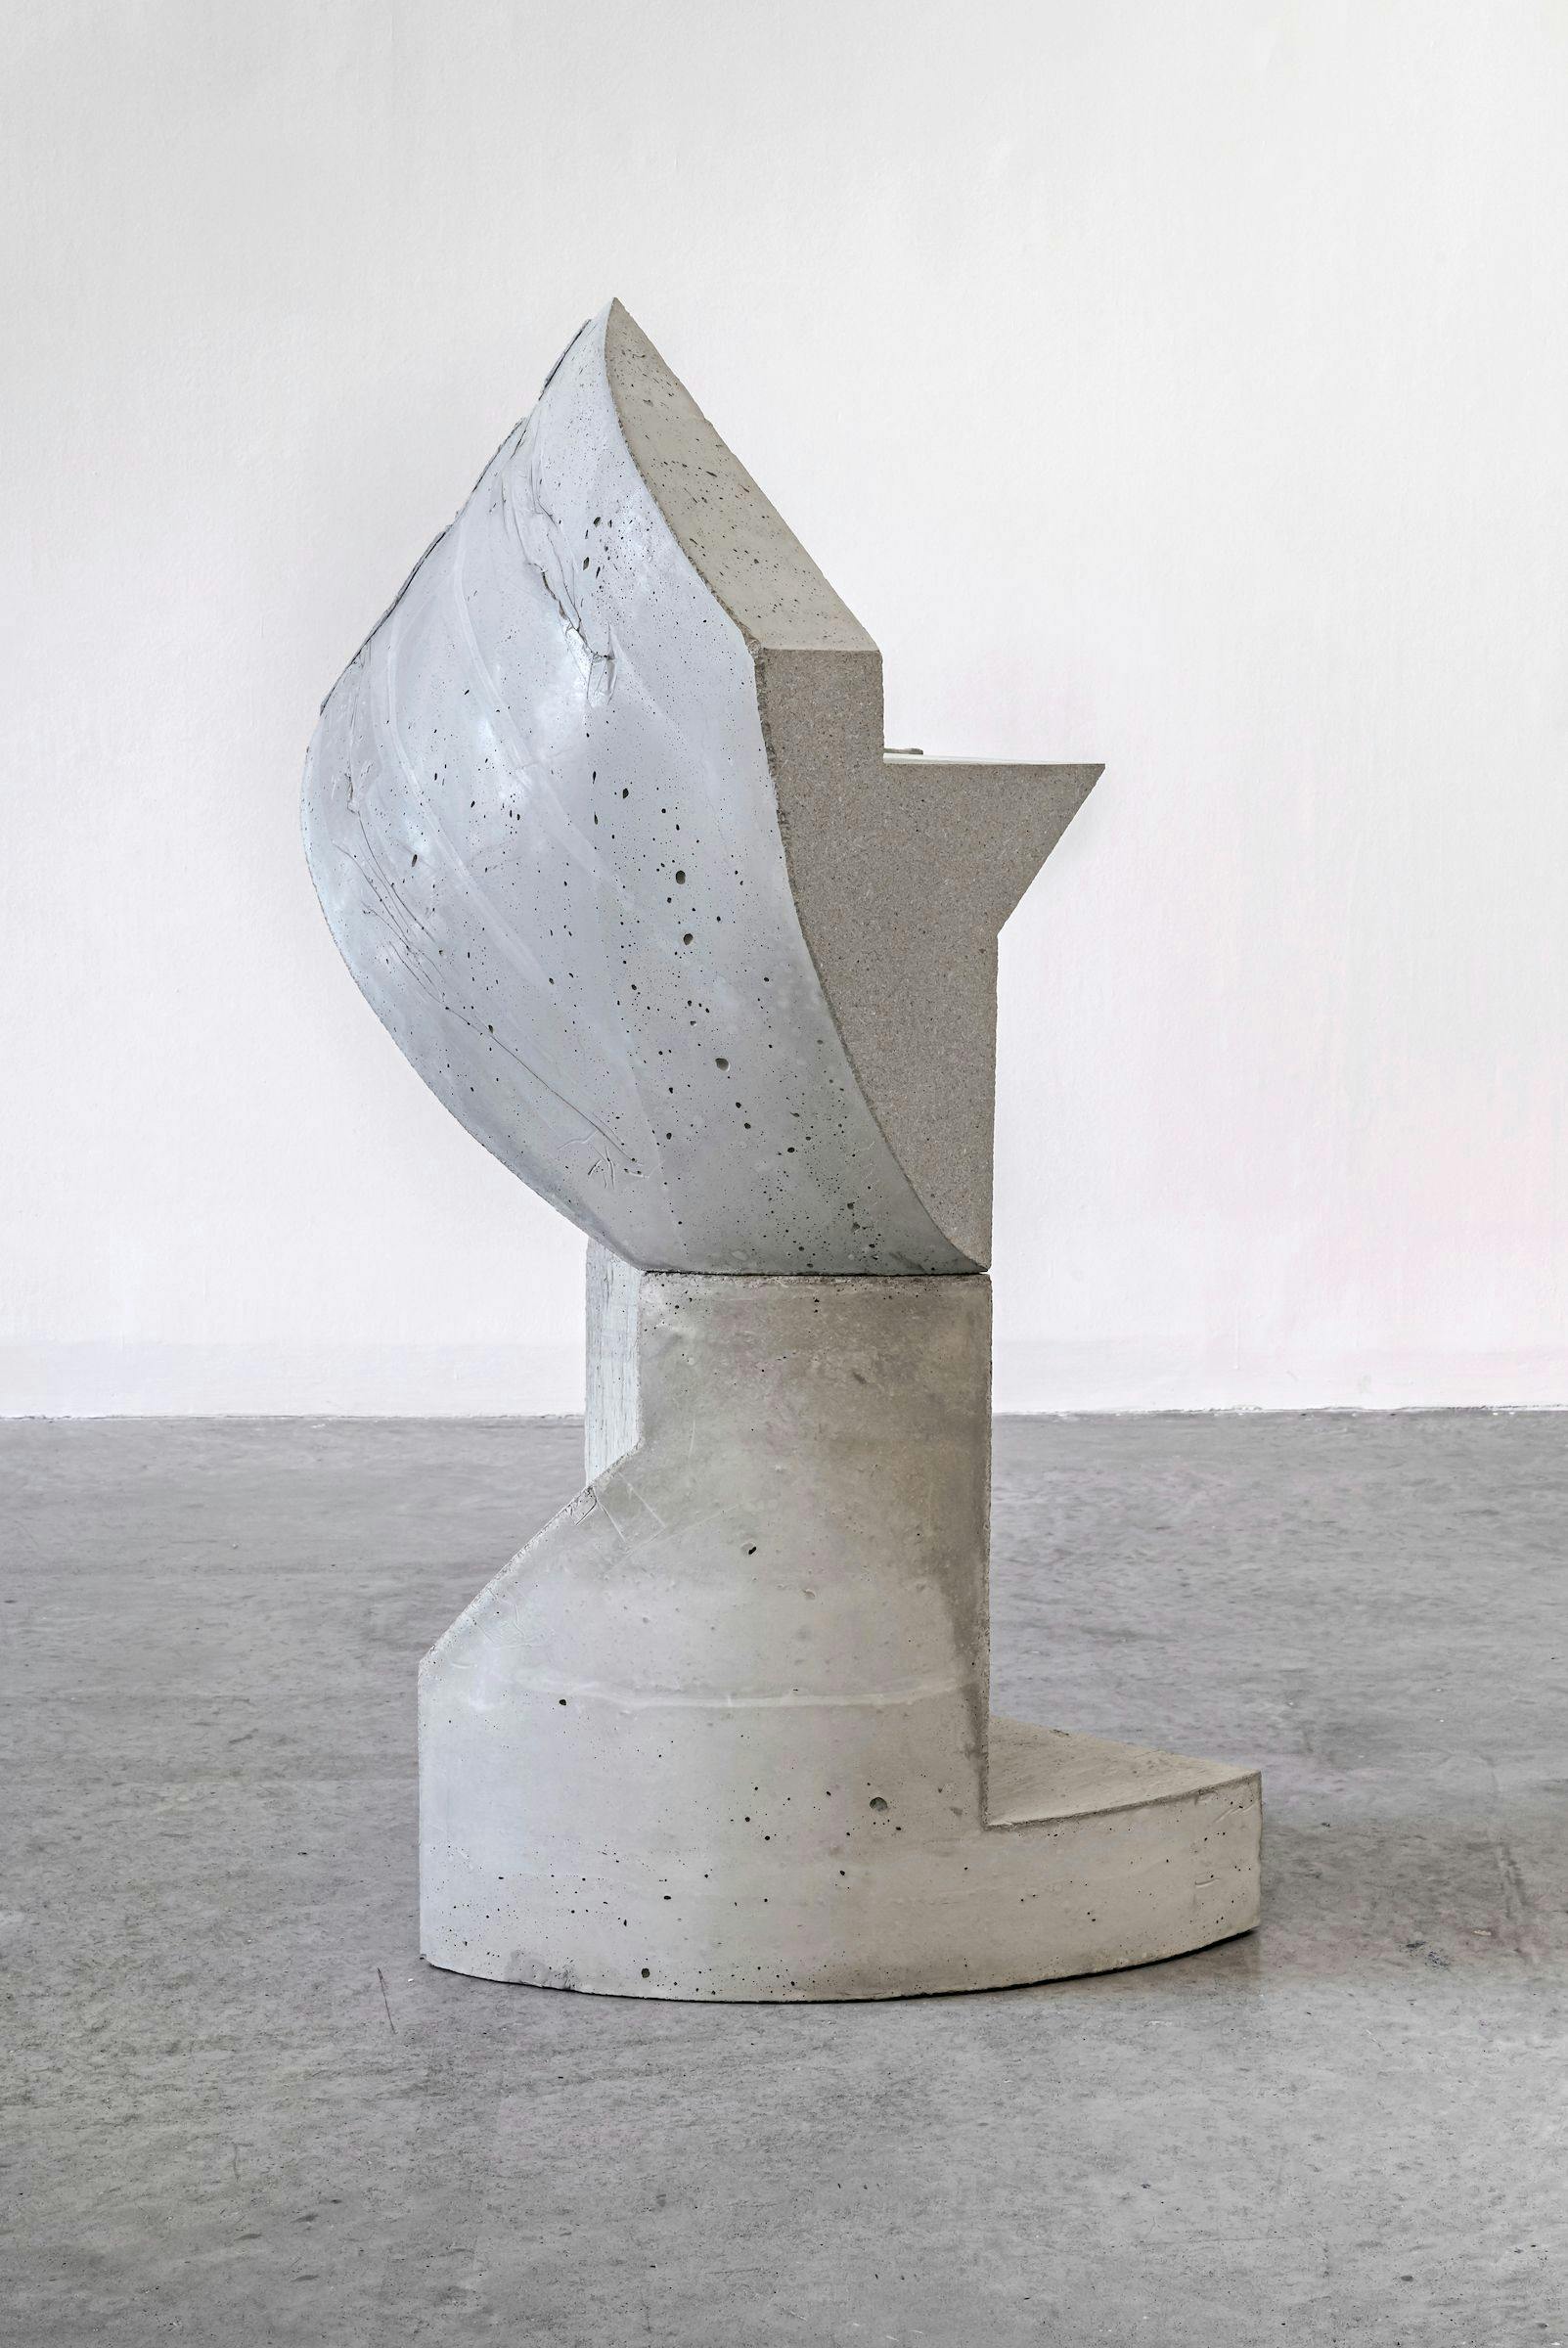 Jen Aitken, Ellocape, 2019. Concrete and foam. Private collection. Installation view: The Same Thing Looks Different, The Power Plant, Toronto, 2023. Photo: Toni Hafkenscheid.